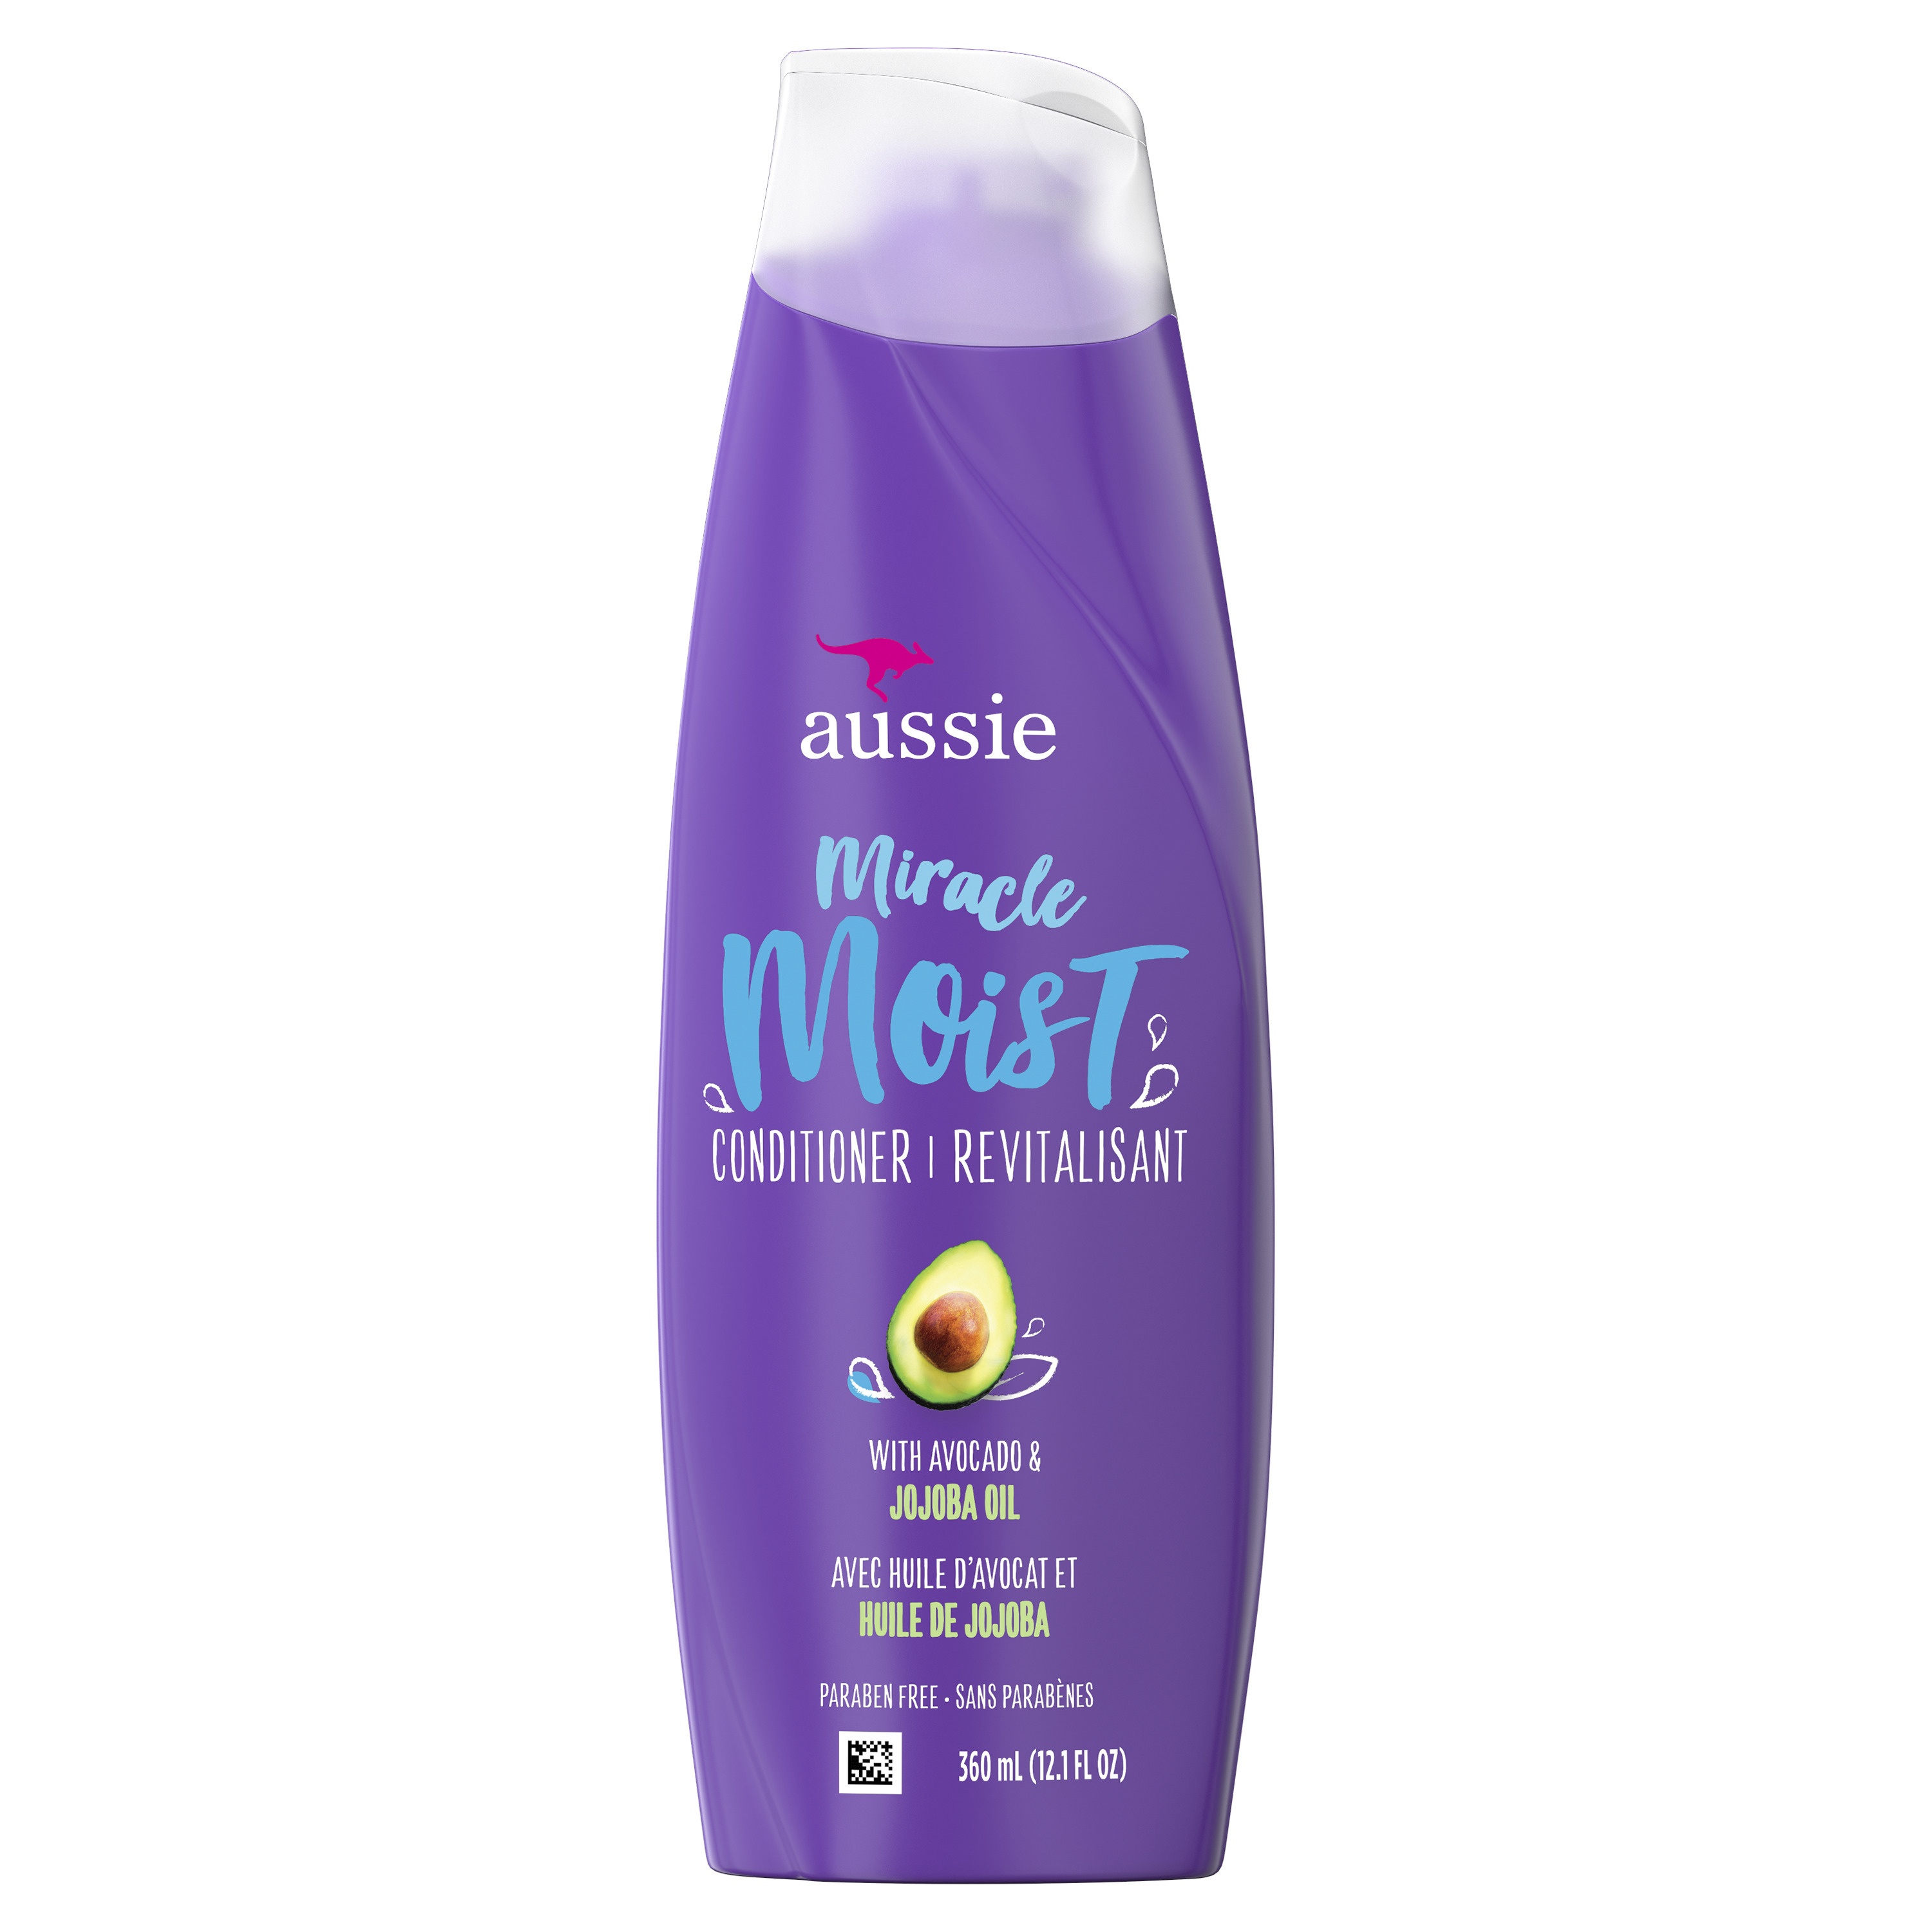 Aussie Miracle Moist Conditioner for Dry Hair, Paraben Free, 12.1 oz - image 1 of 9